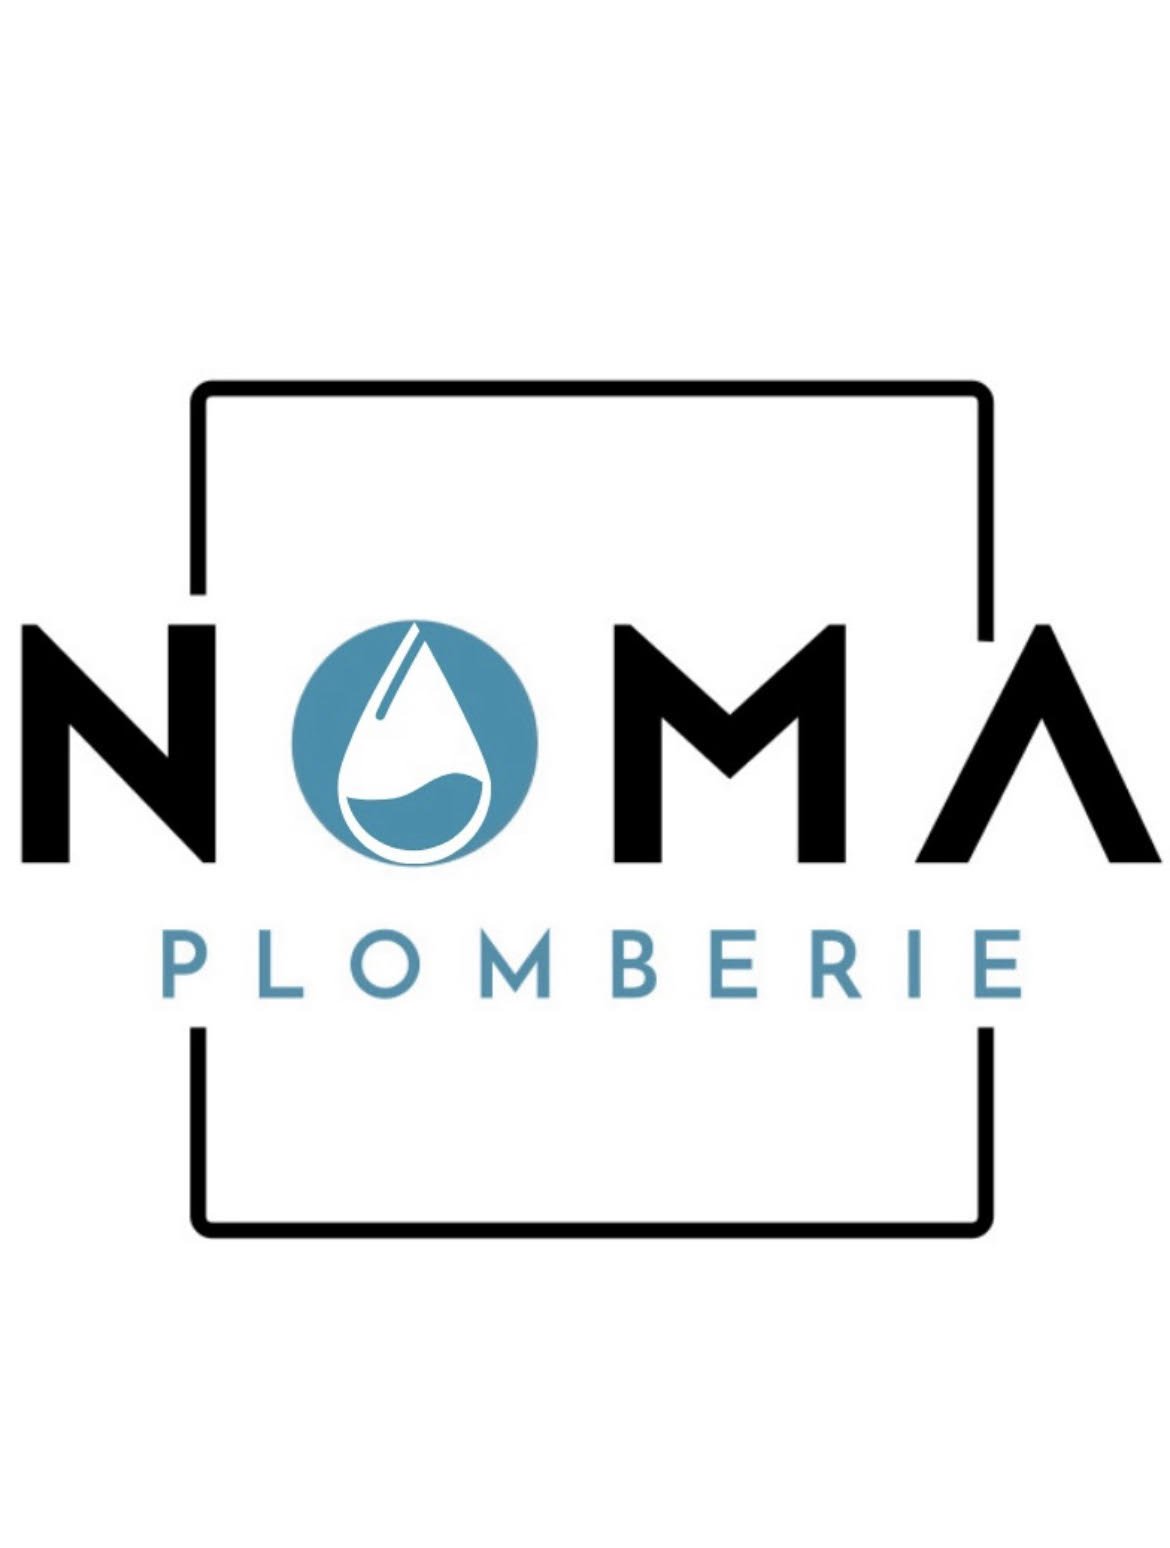 Noma plomberie